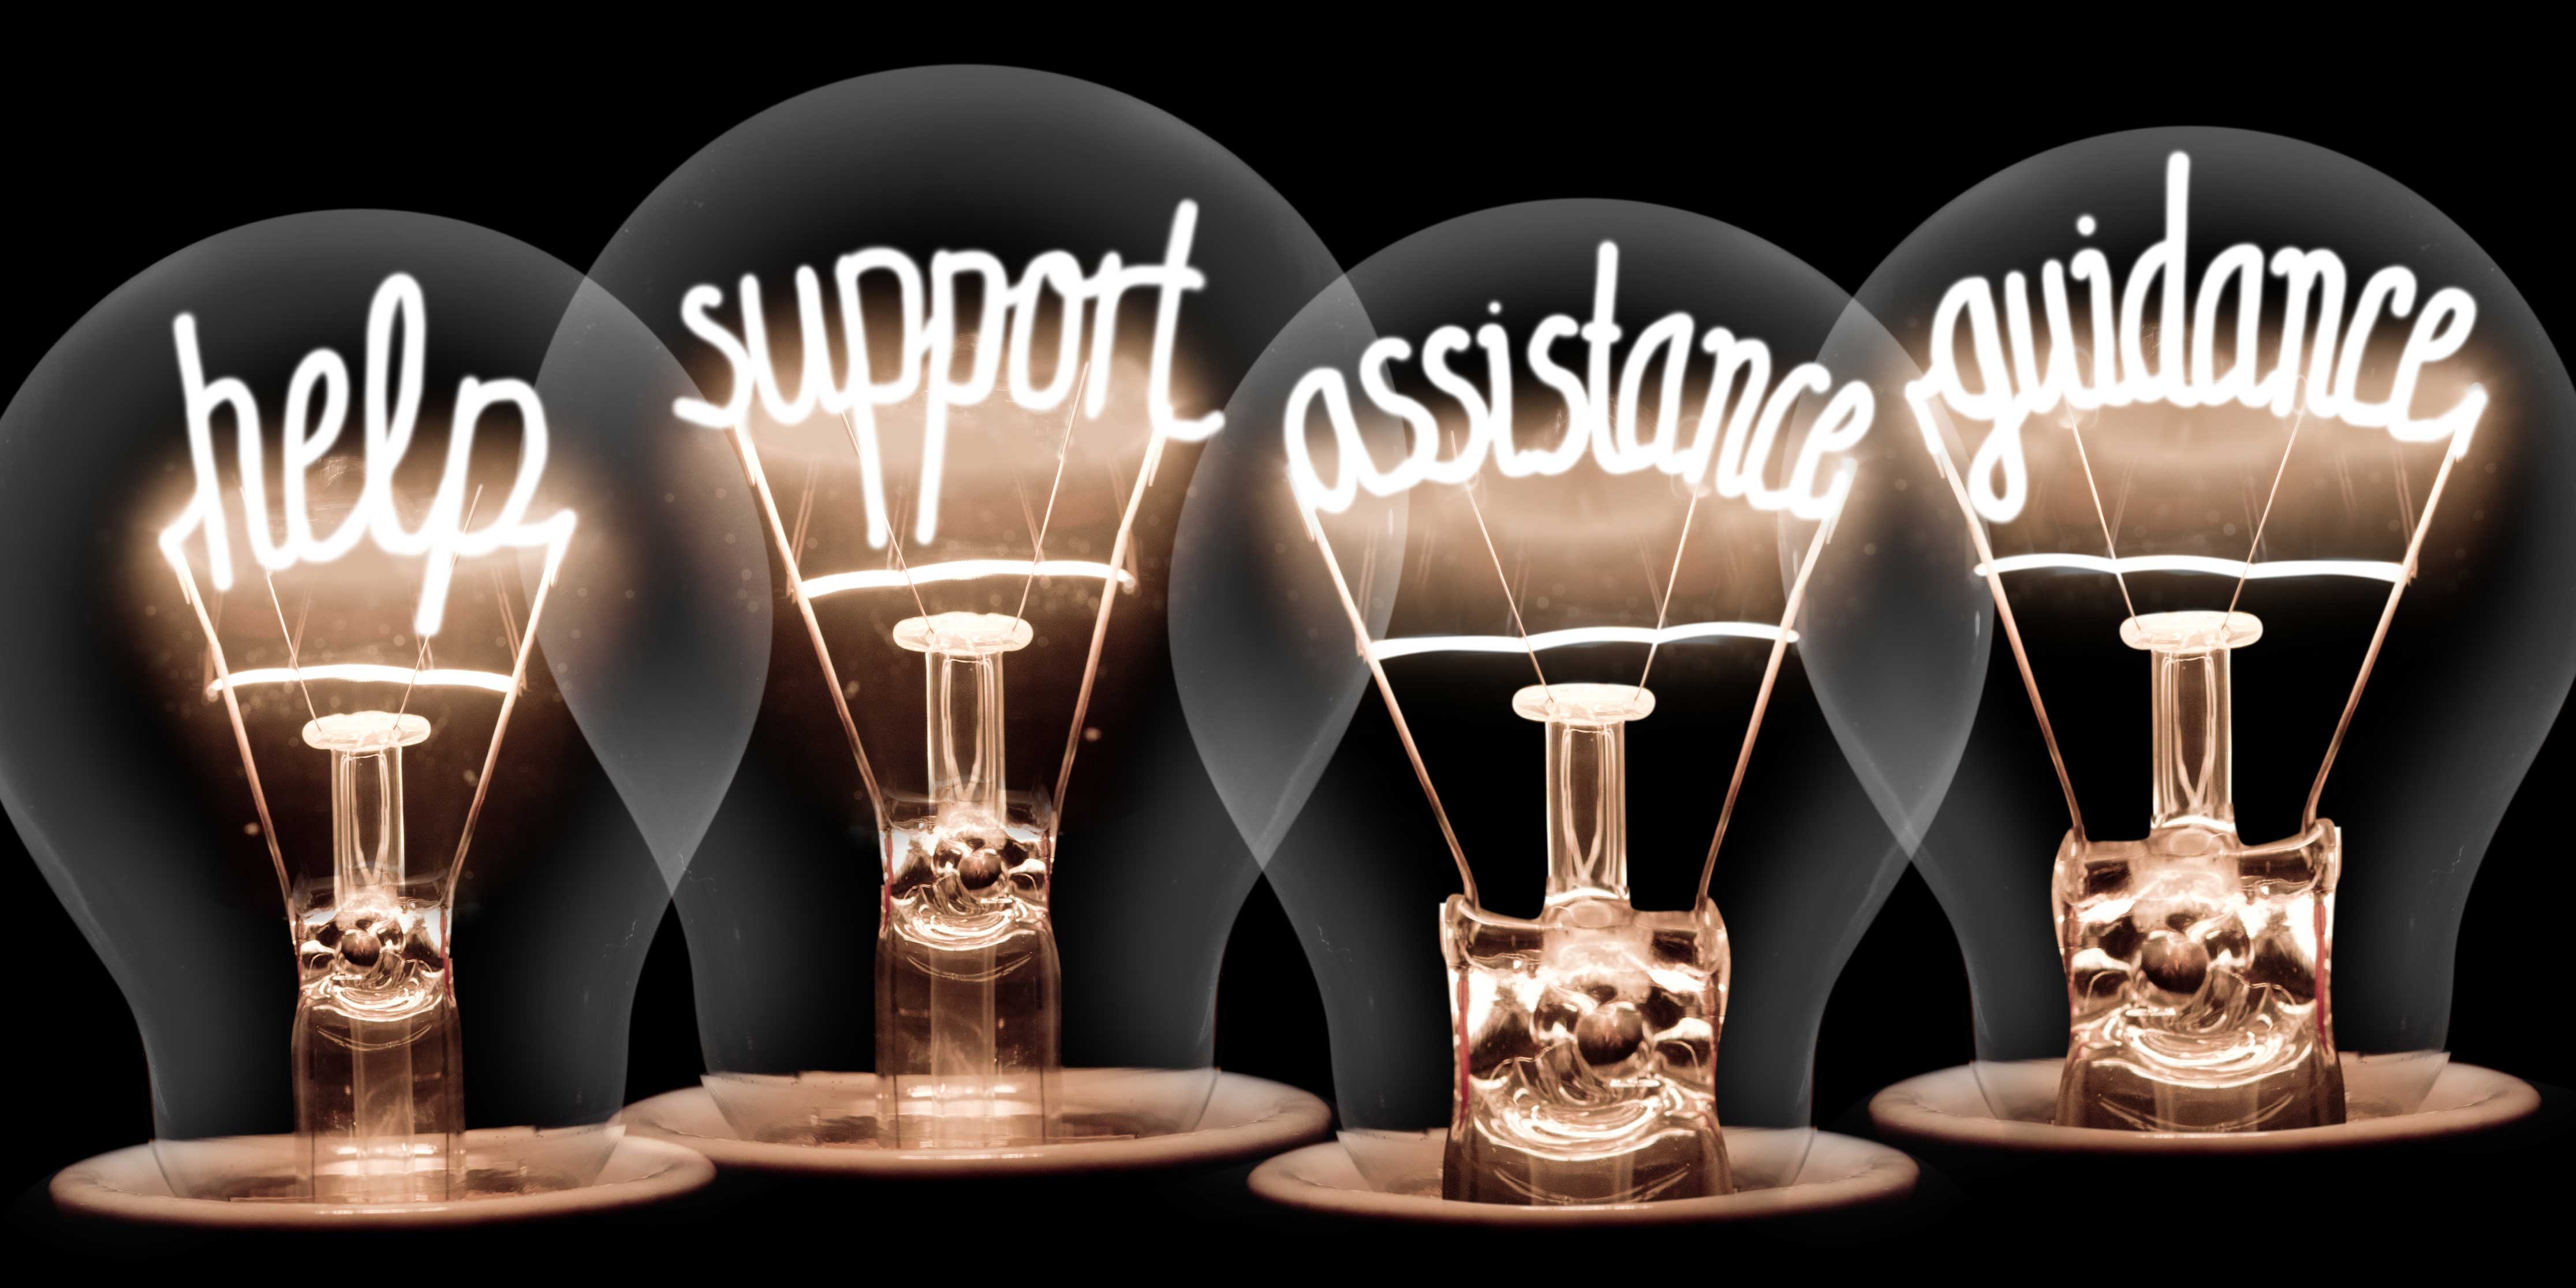 Four lightbulbs that each have a word within the bulb wire. Help, support, assistance, guidance 